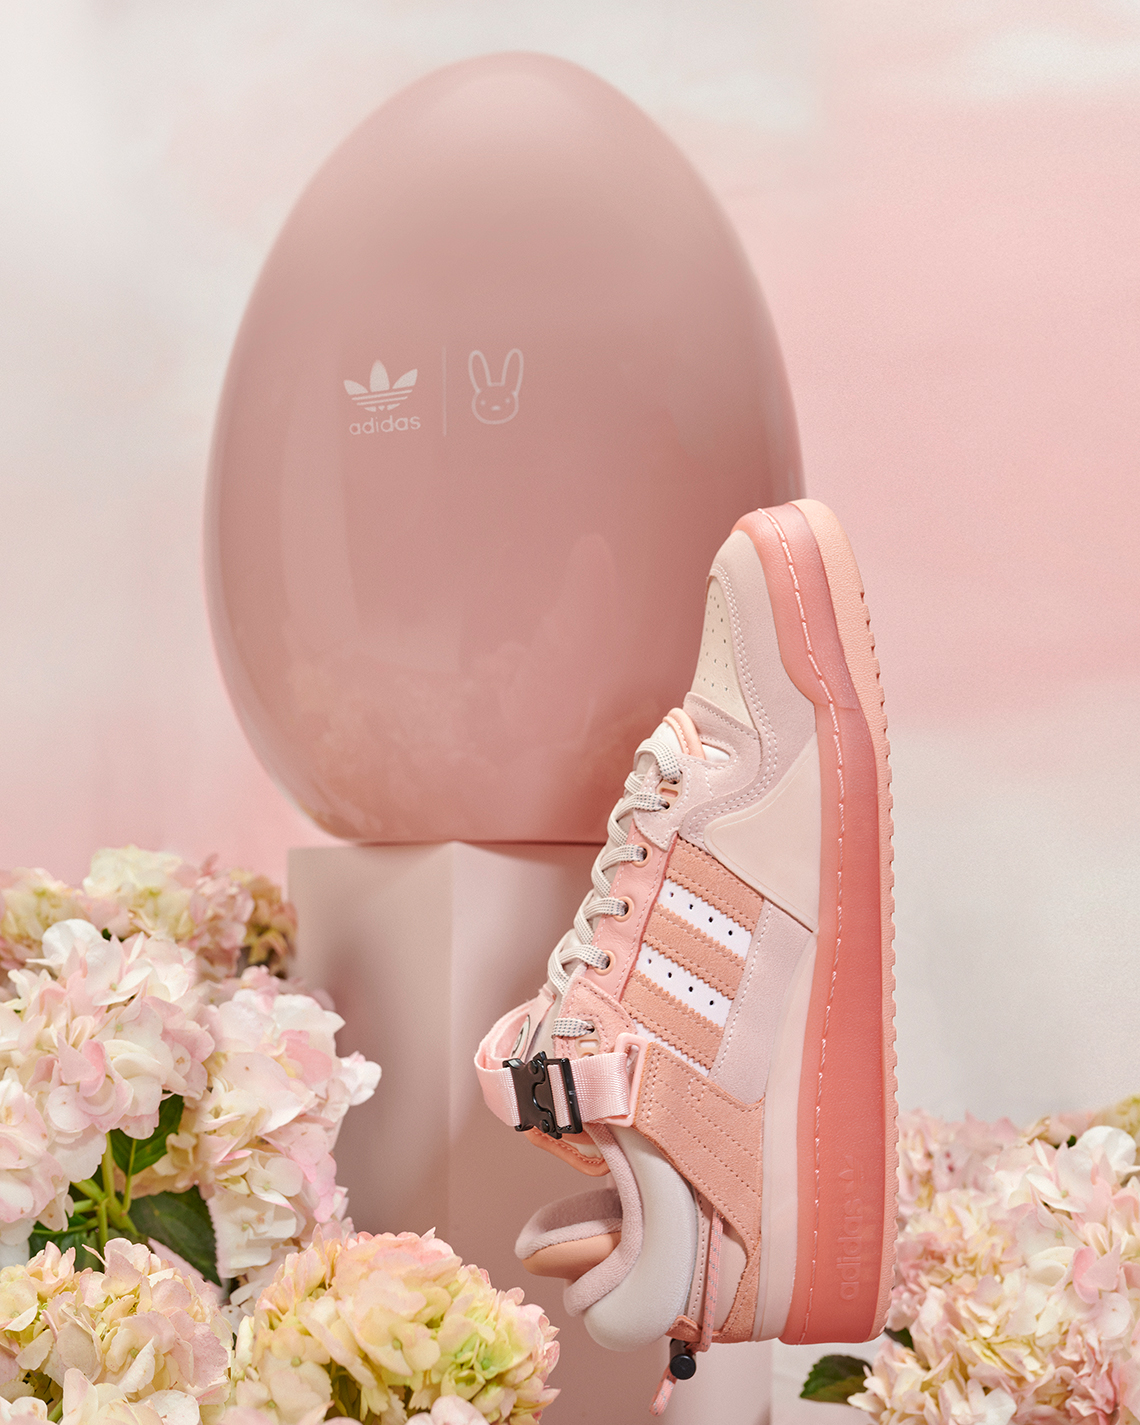 Bad Bunny Adidas Pink Shoes Release Date 2